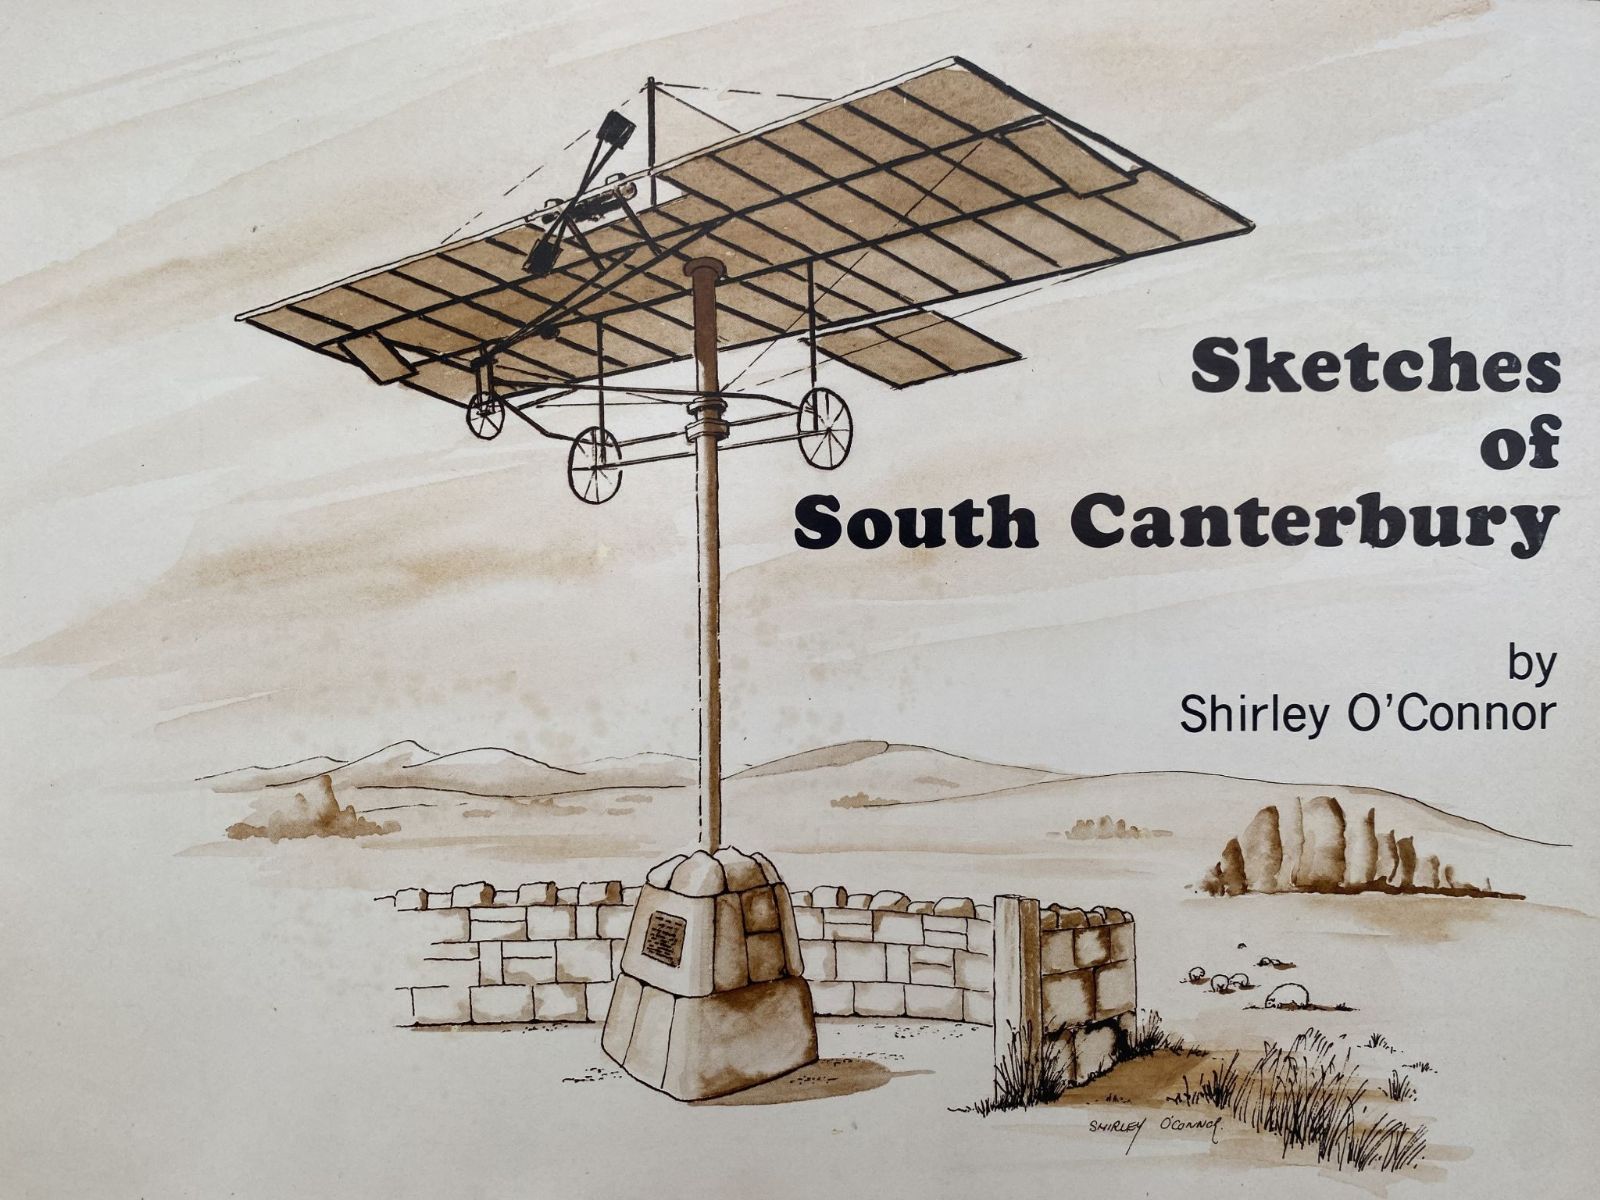 SKETCHES OF SOUTH CANTERBURY